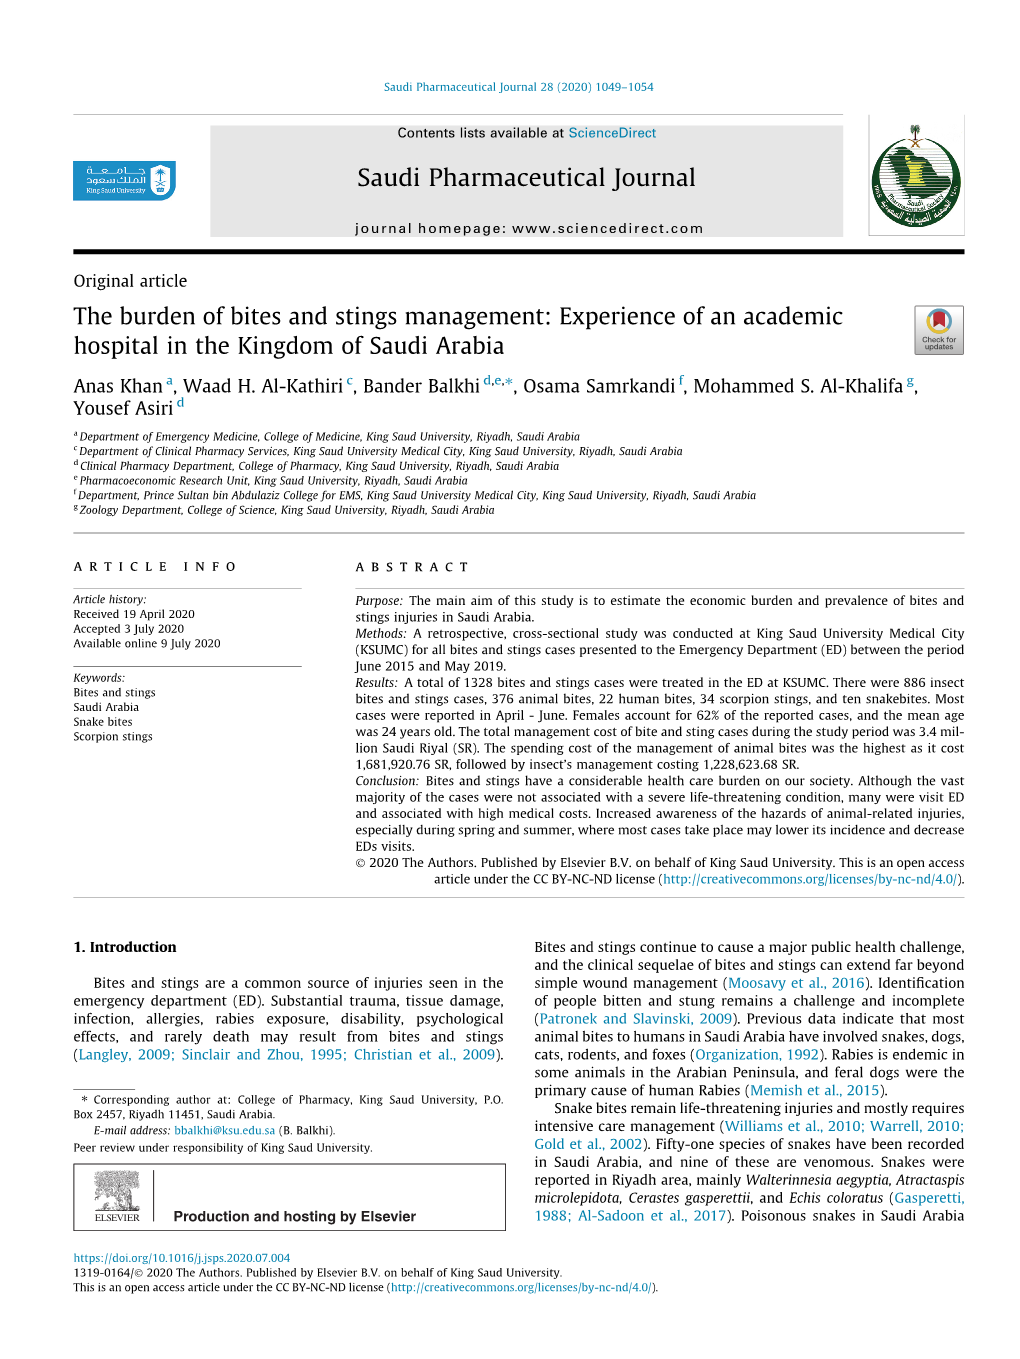 The Burden of Bites and Stings Management: Experience of an Academic Hospital in the Kingdom of Saudi Arabia ⇑ Anas Khan A, Waad H